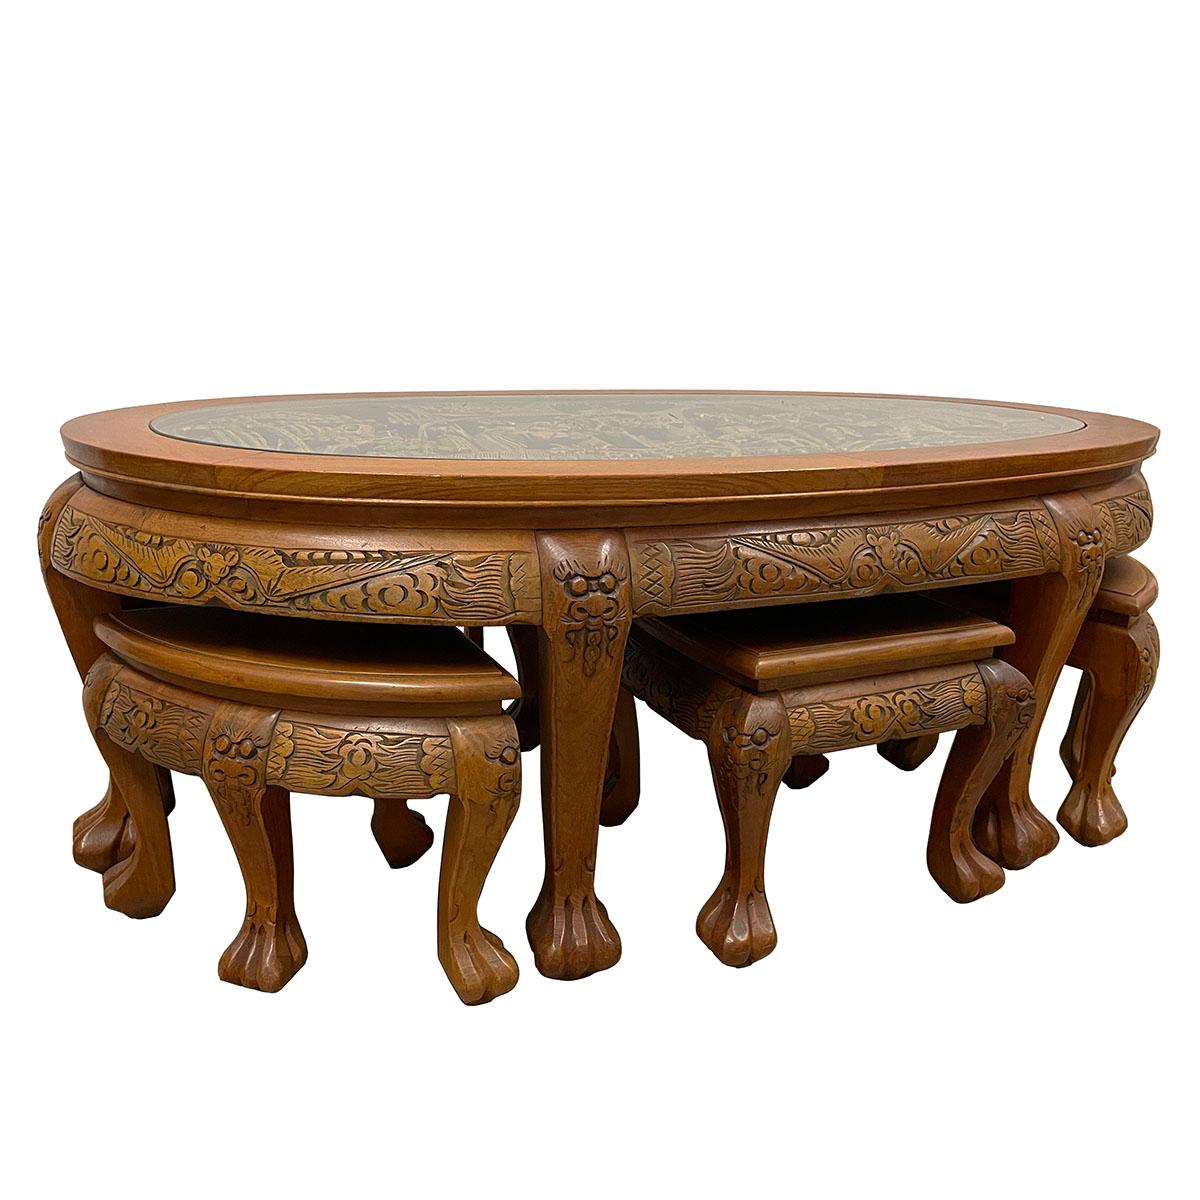 This beautiful teak wood coffee table has a lot of Chinese traditional massive carving works of Chinese beauties design on the top. This coffee table made from solid teak wood and has beautiful ornate carving works on the top and side. It come with